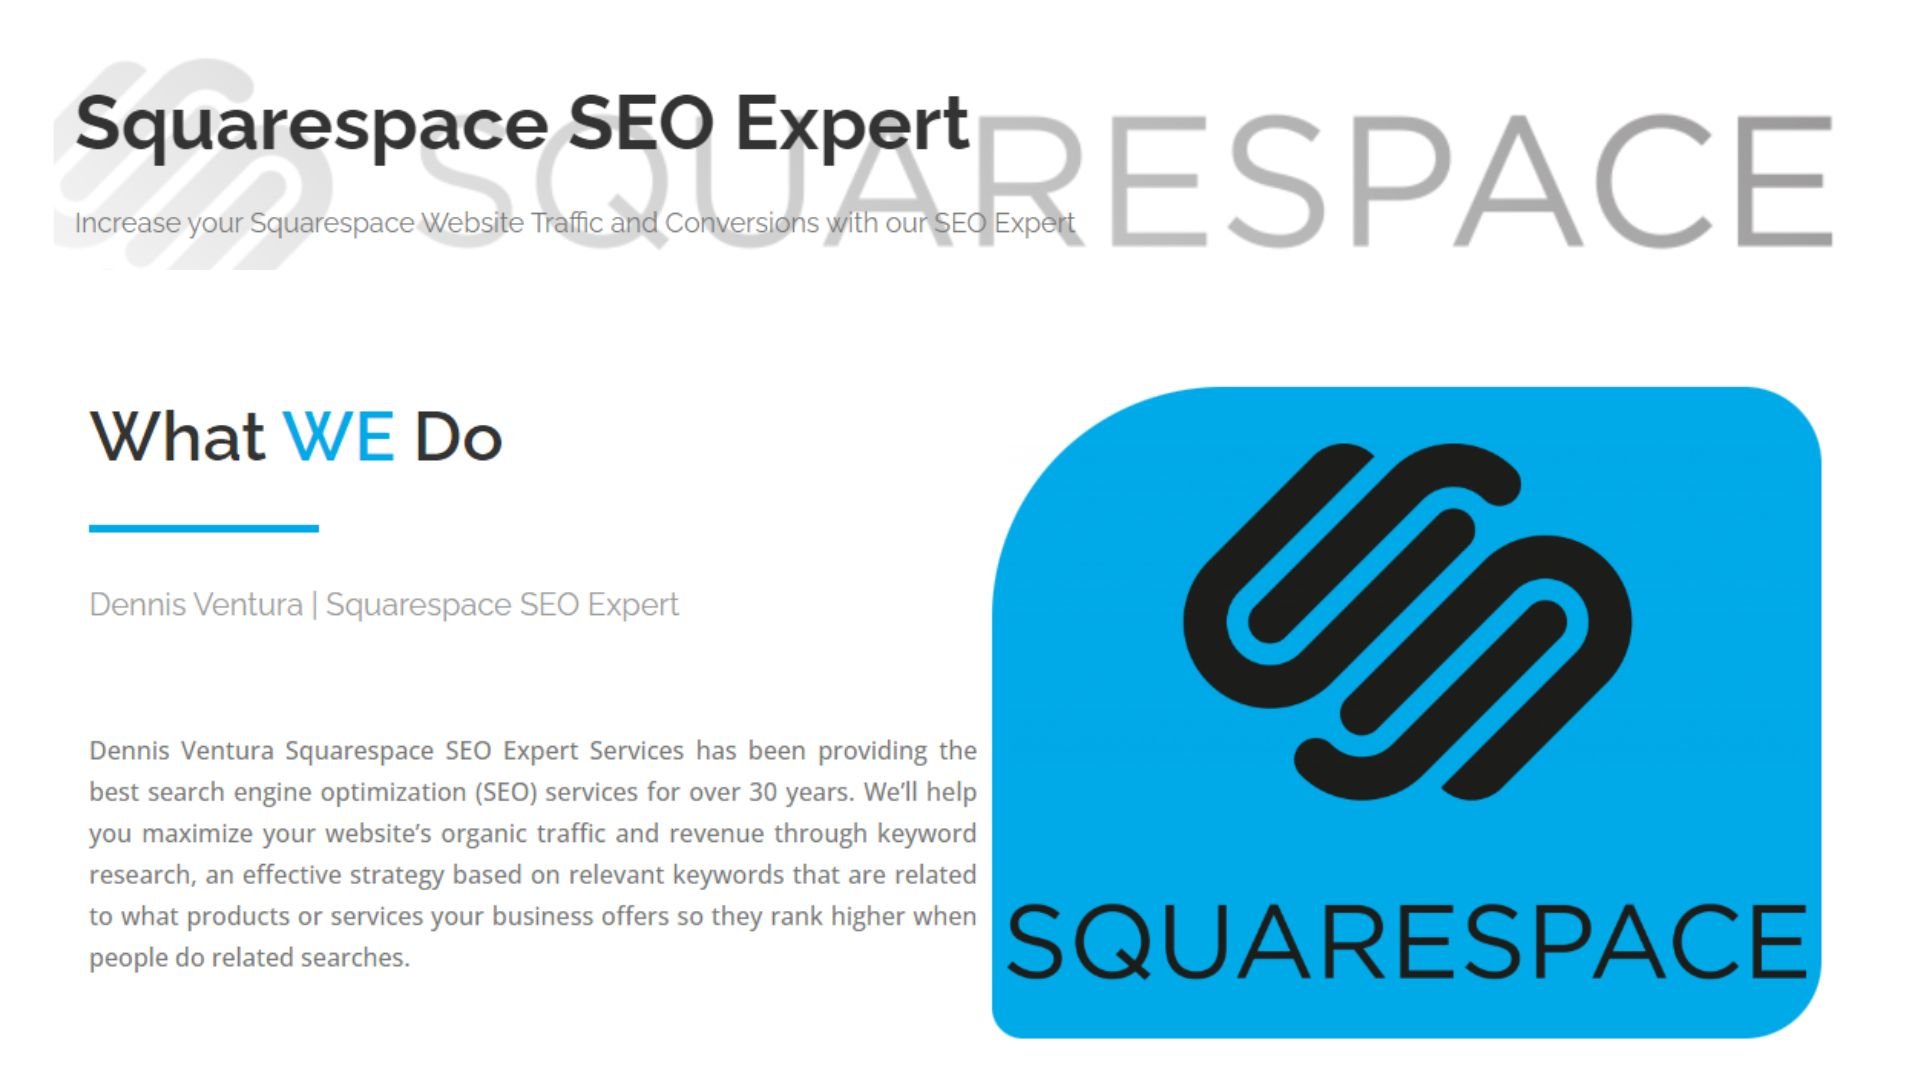 What Are The Drawbacks of Relying to a Squarespace SEO Expert?